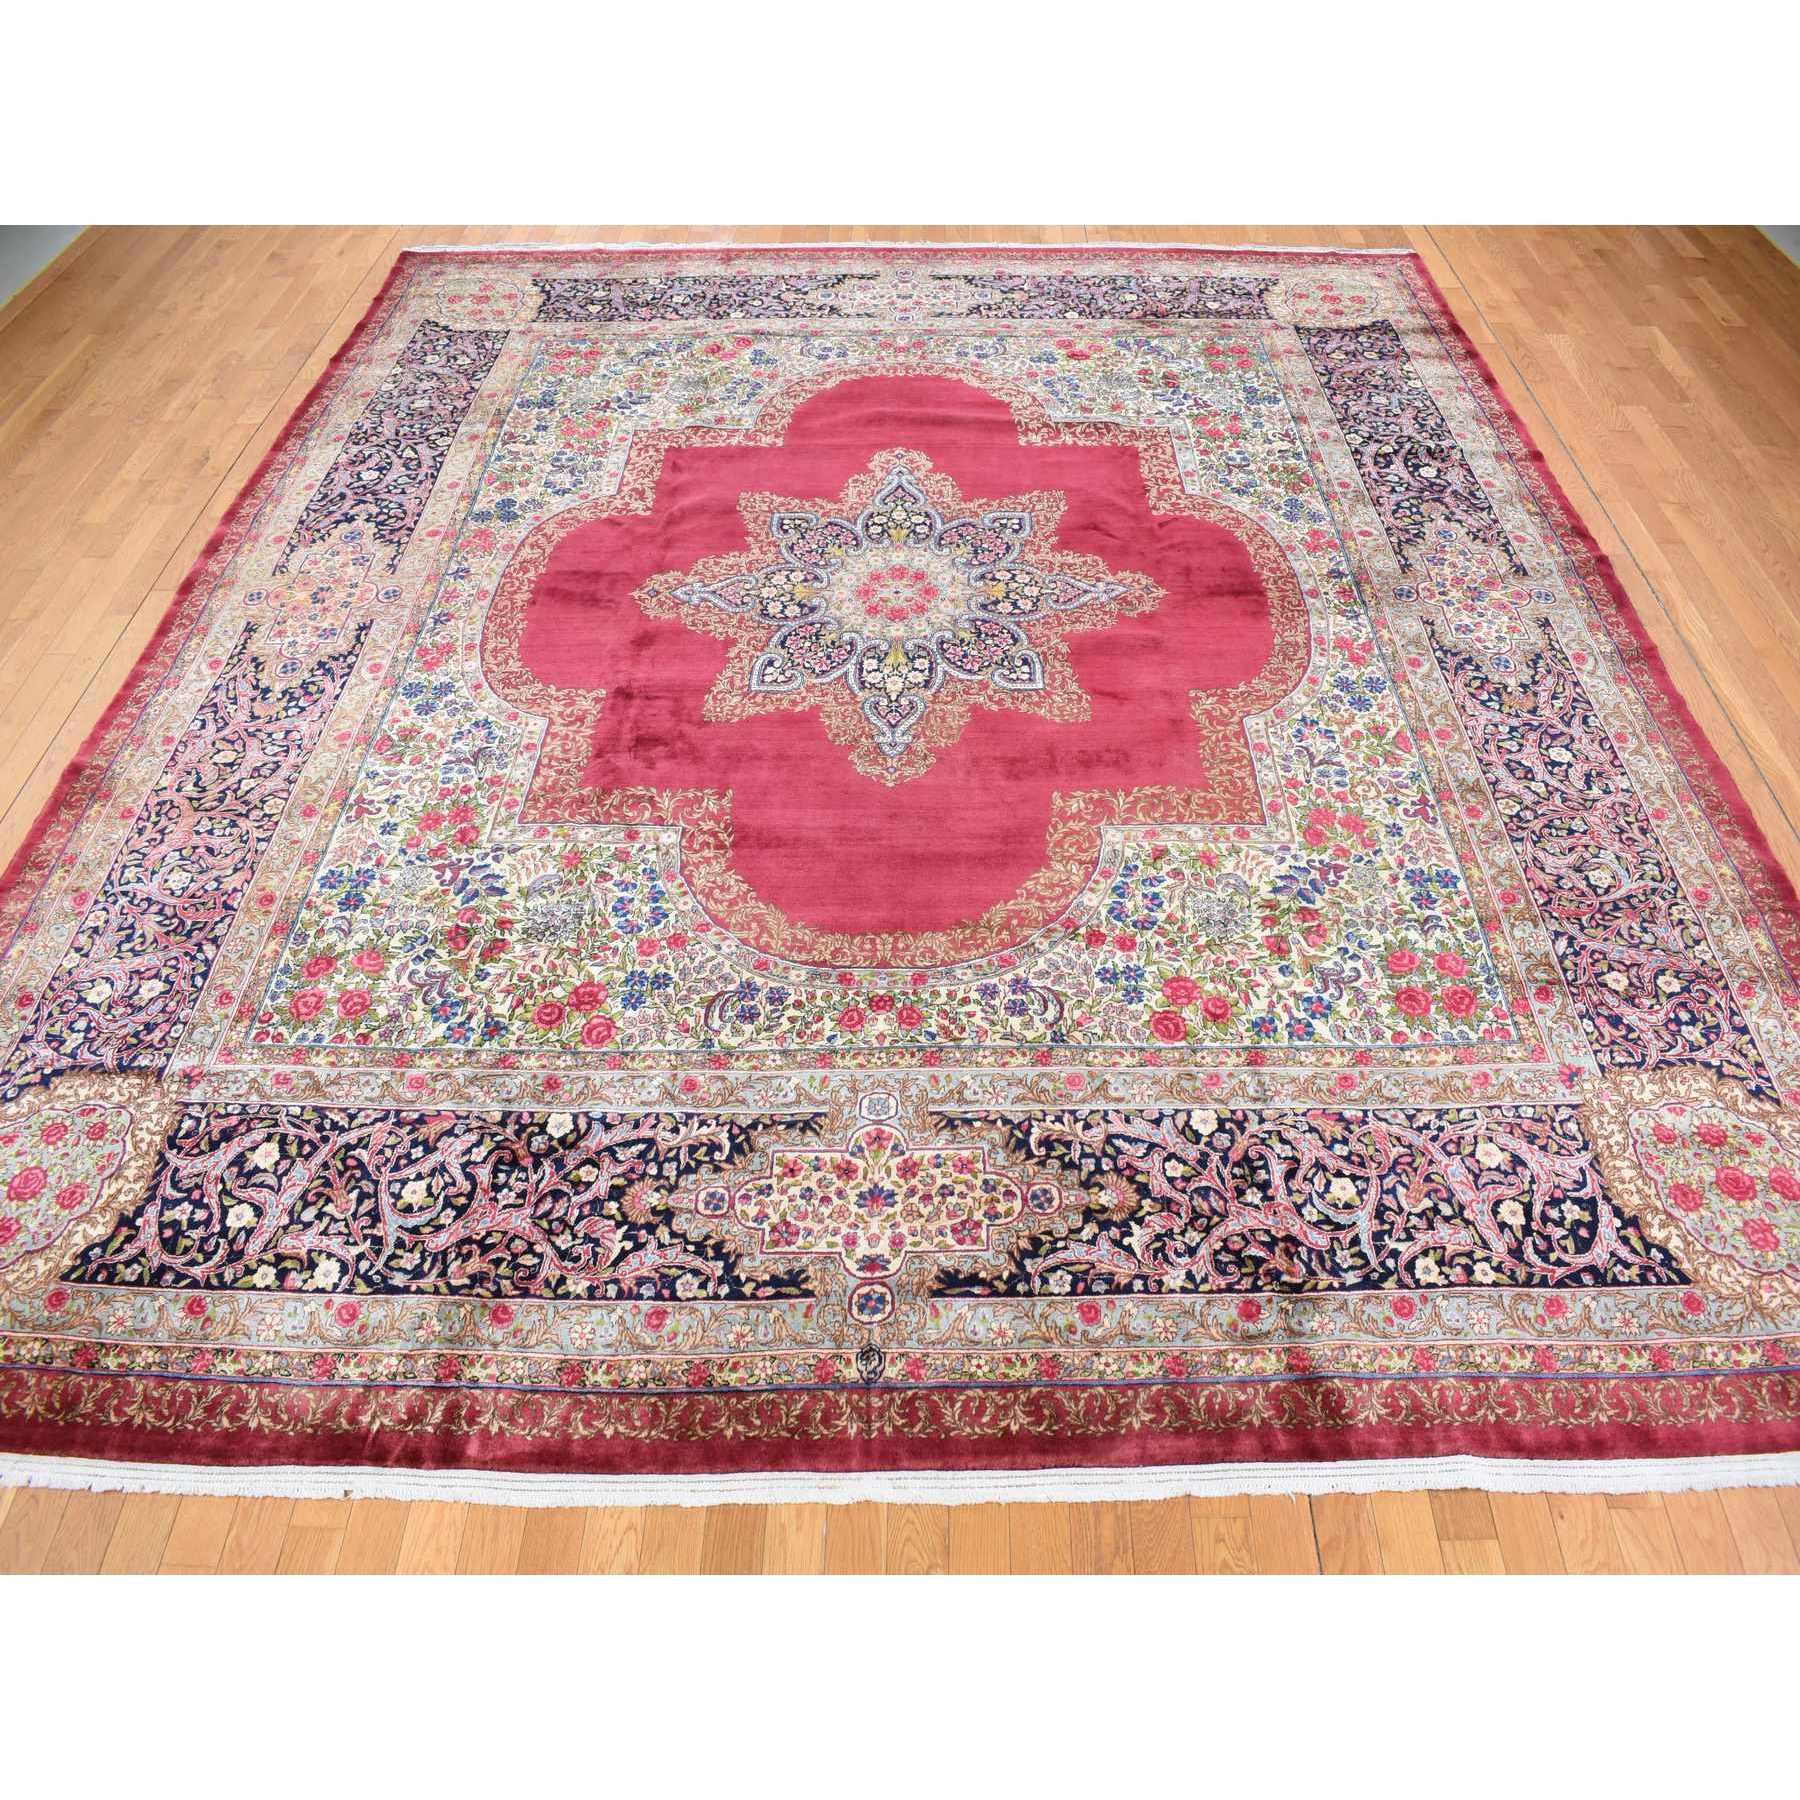  Wool Hand-Knotted Area Rug 11'8